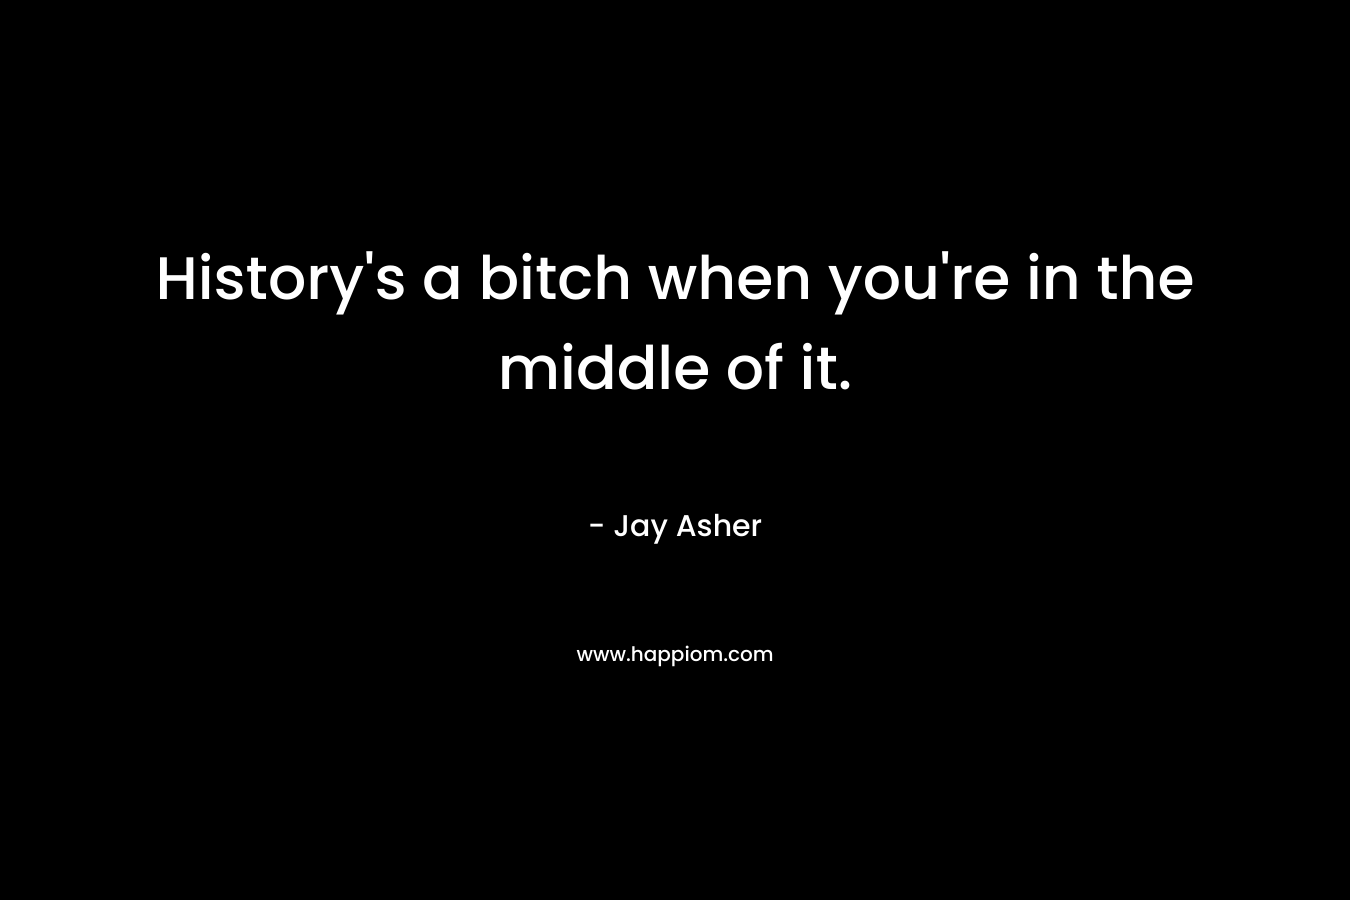 History’s a bitch when you’re in the middle of it. – Jay Asher